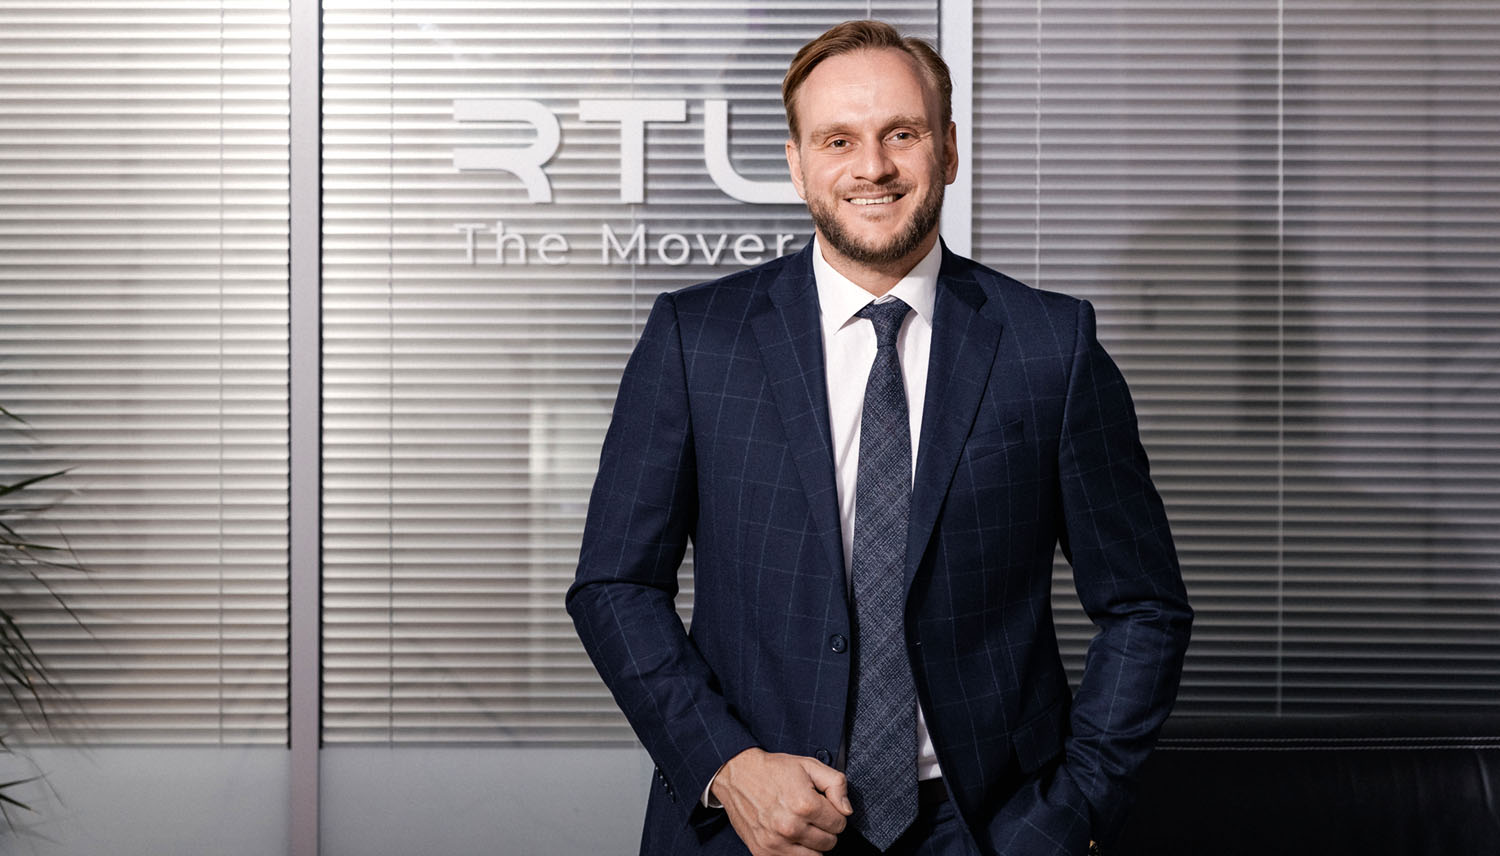 The Mover. New positioning of RTL Alliance